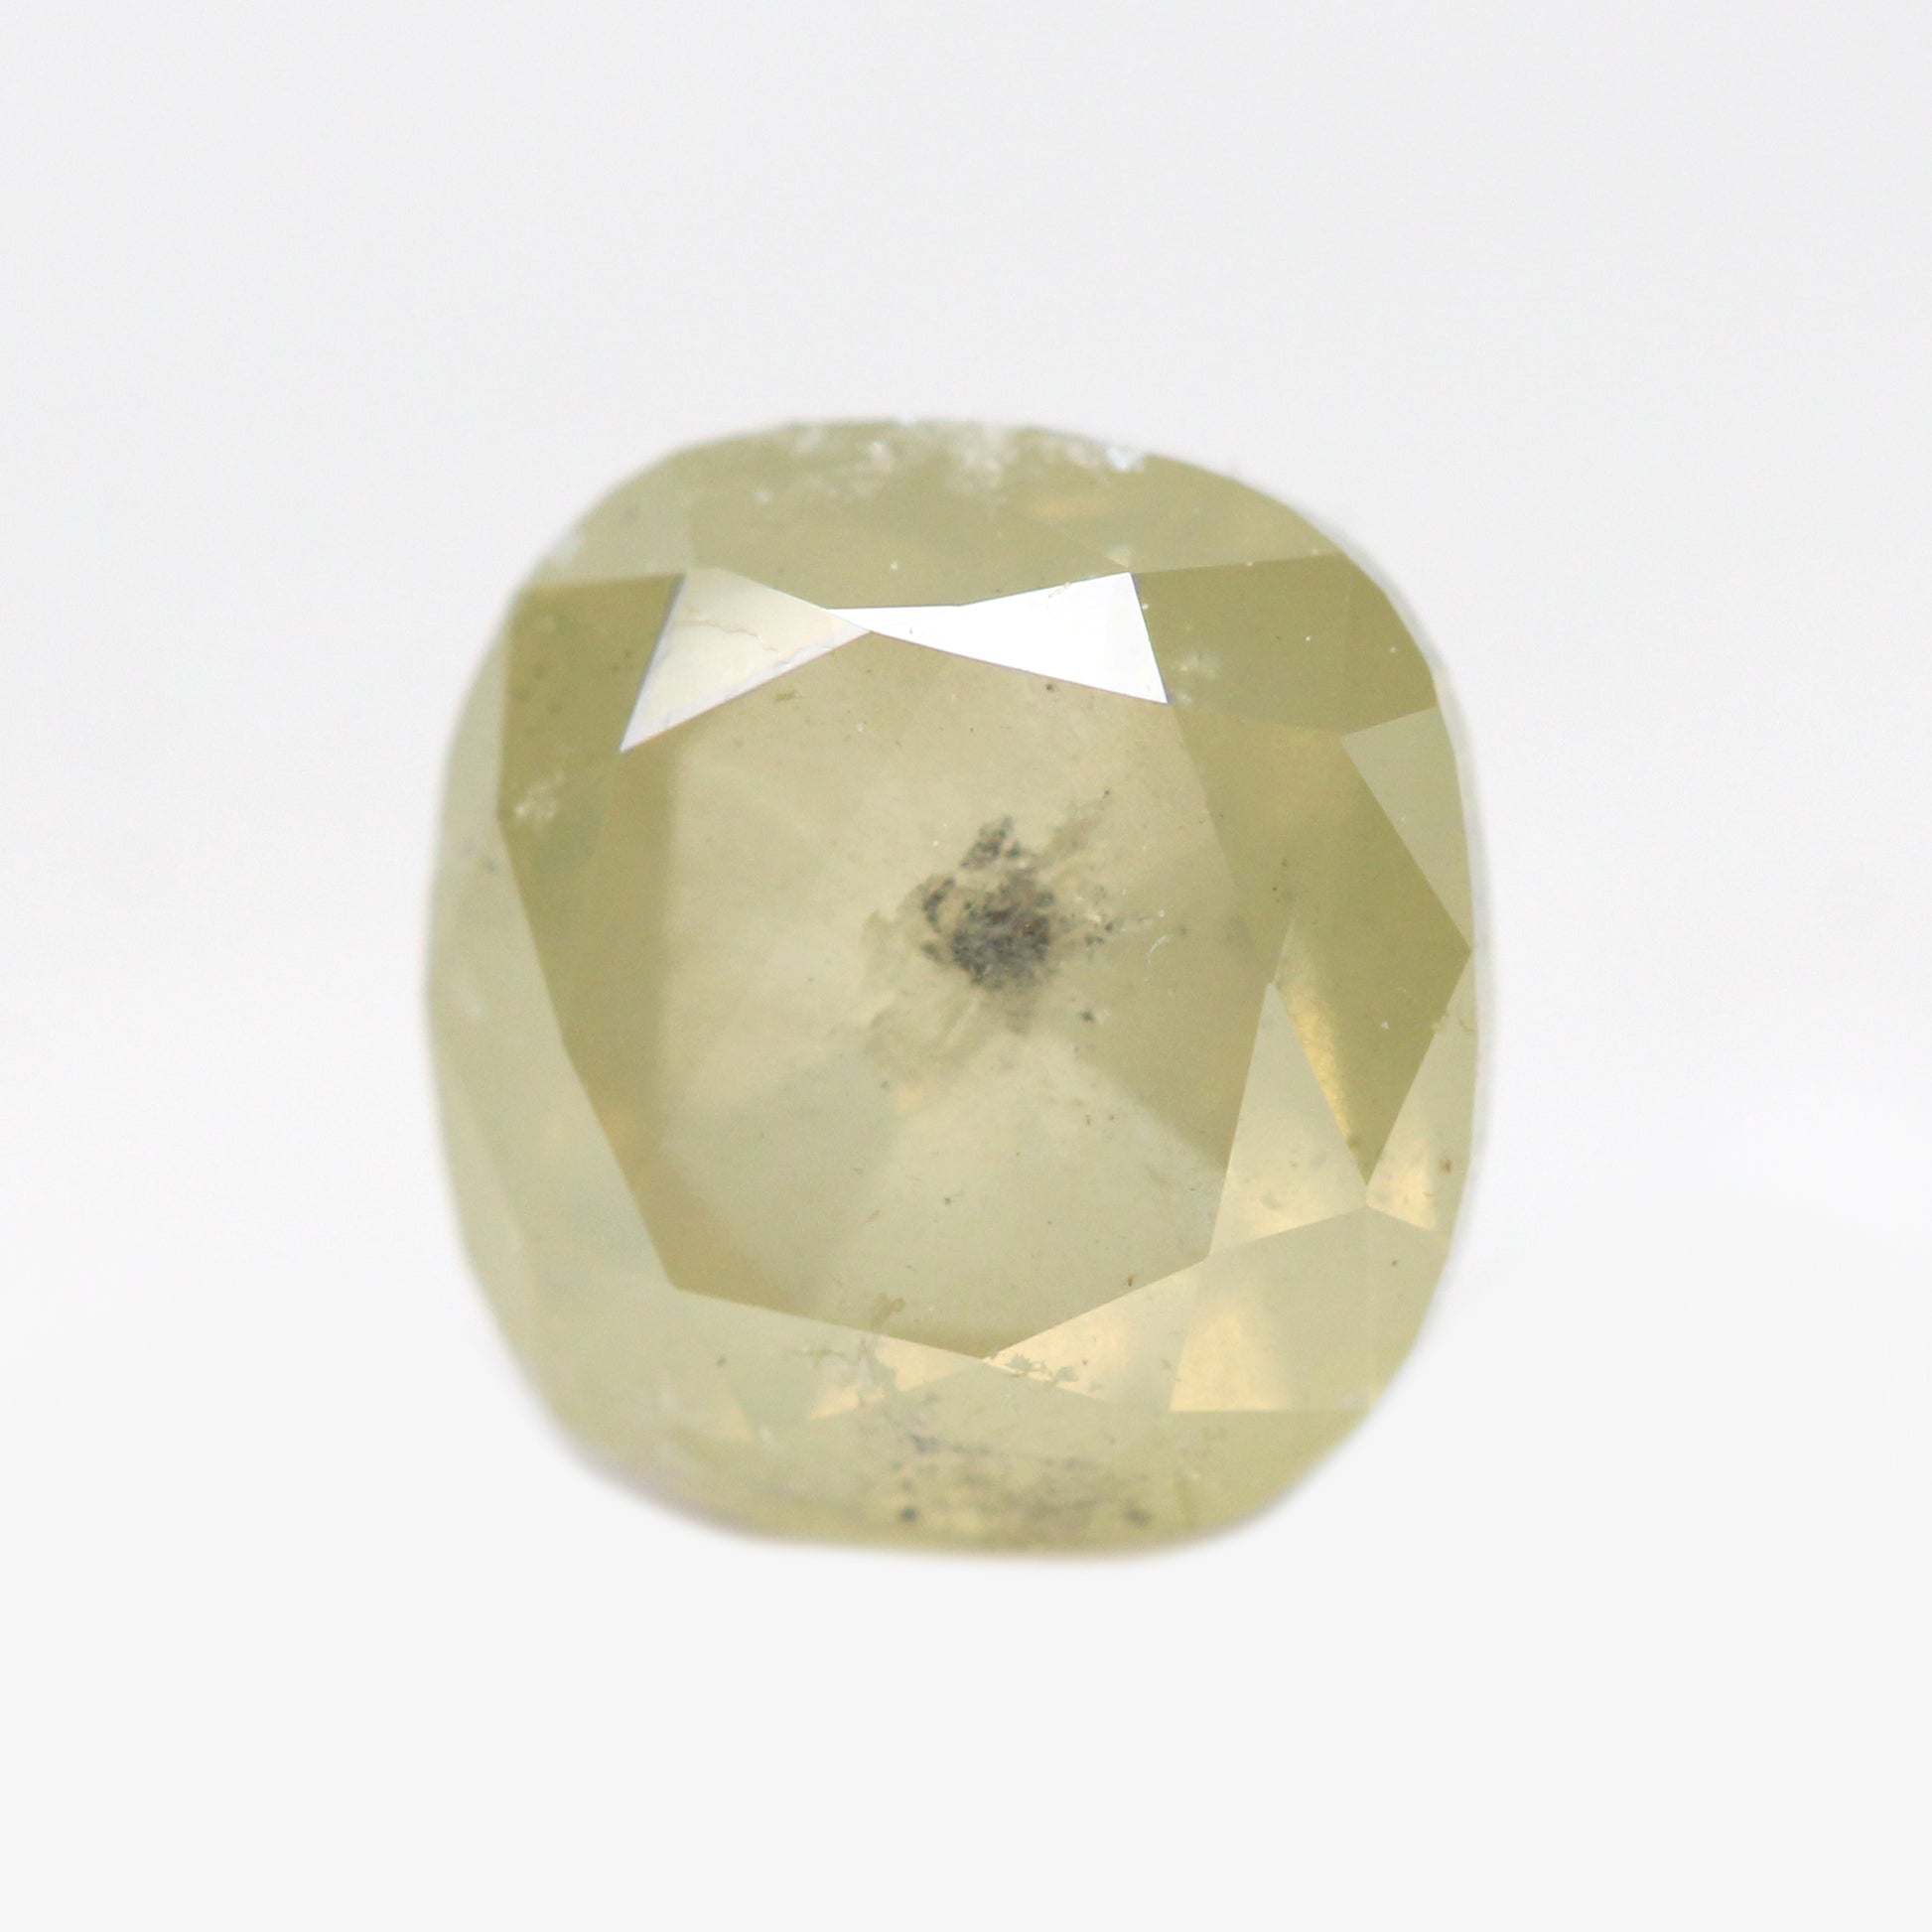 1.20 Carat Cushion Cut Misty Champagne Yellow Salt and Pepper Diamond for Custom Work - Inventory Code MGC120 - Midwinter Co. Alternative Bridal Rings and Modern Fine Jewelry